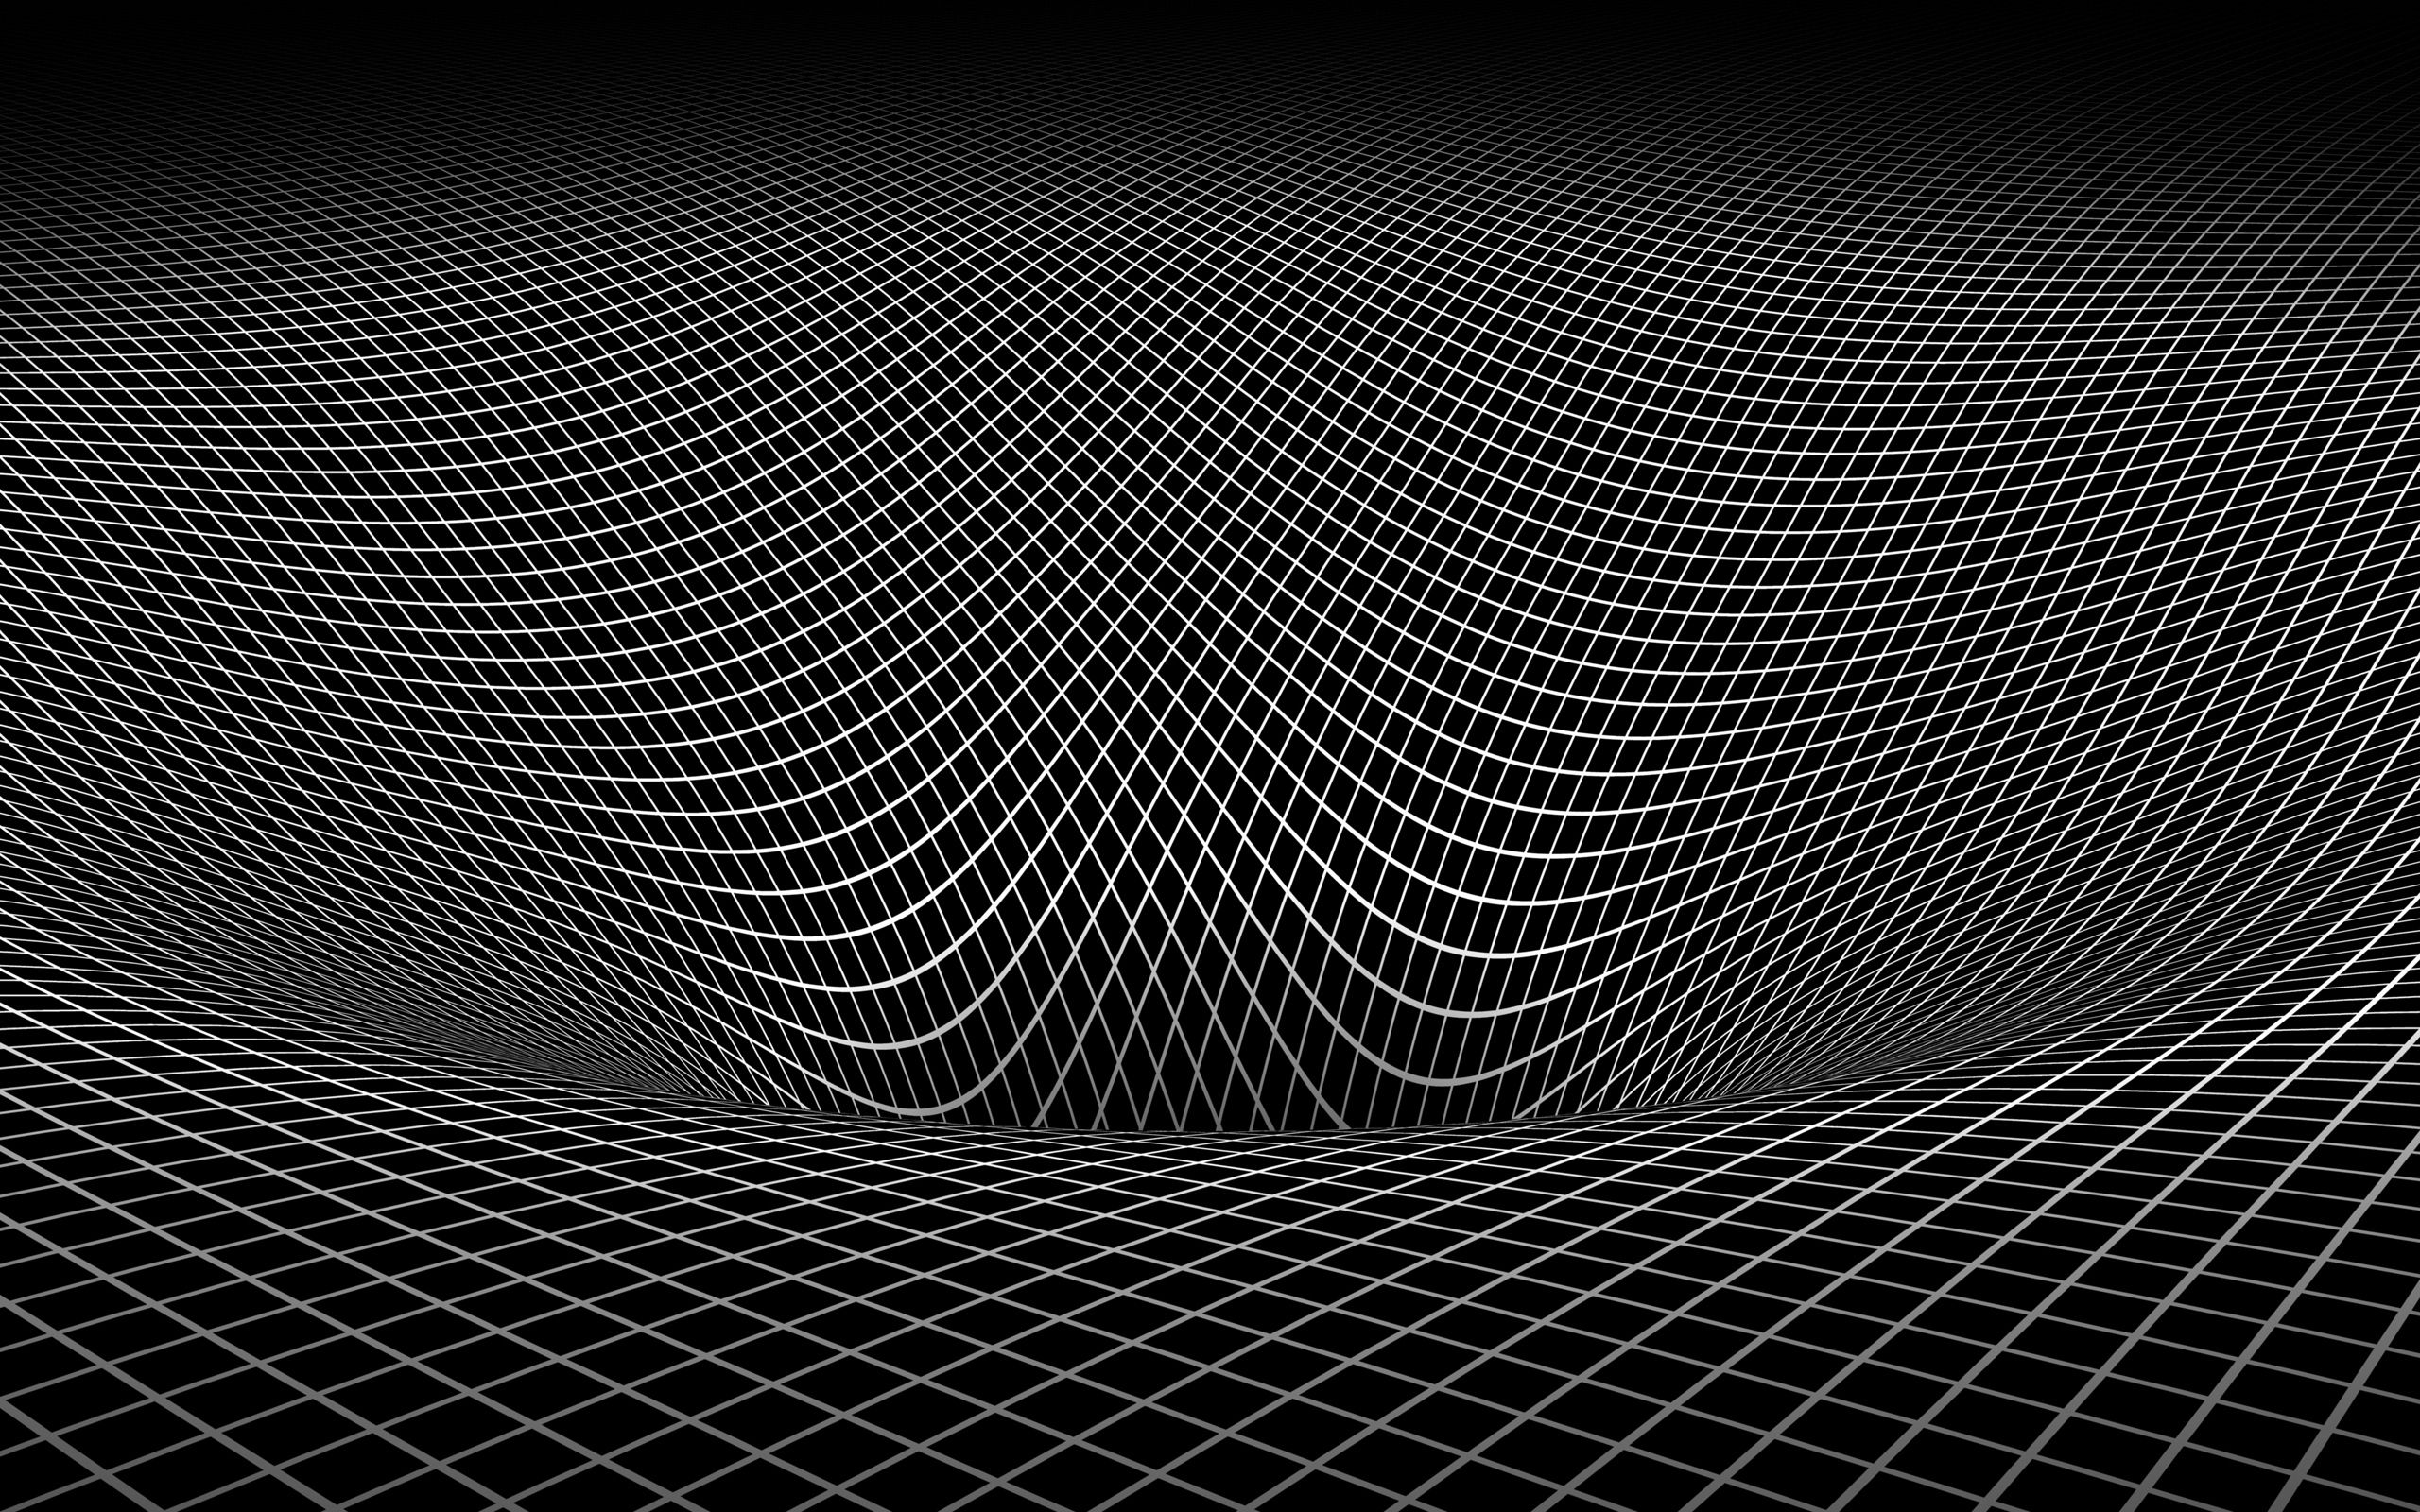 surface, 3d, grid, bw, chb, immersion lock screen backgrounds